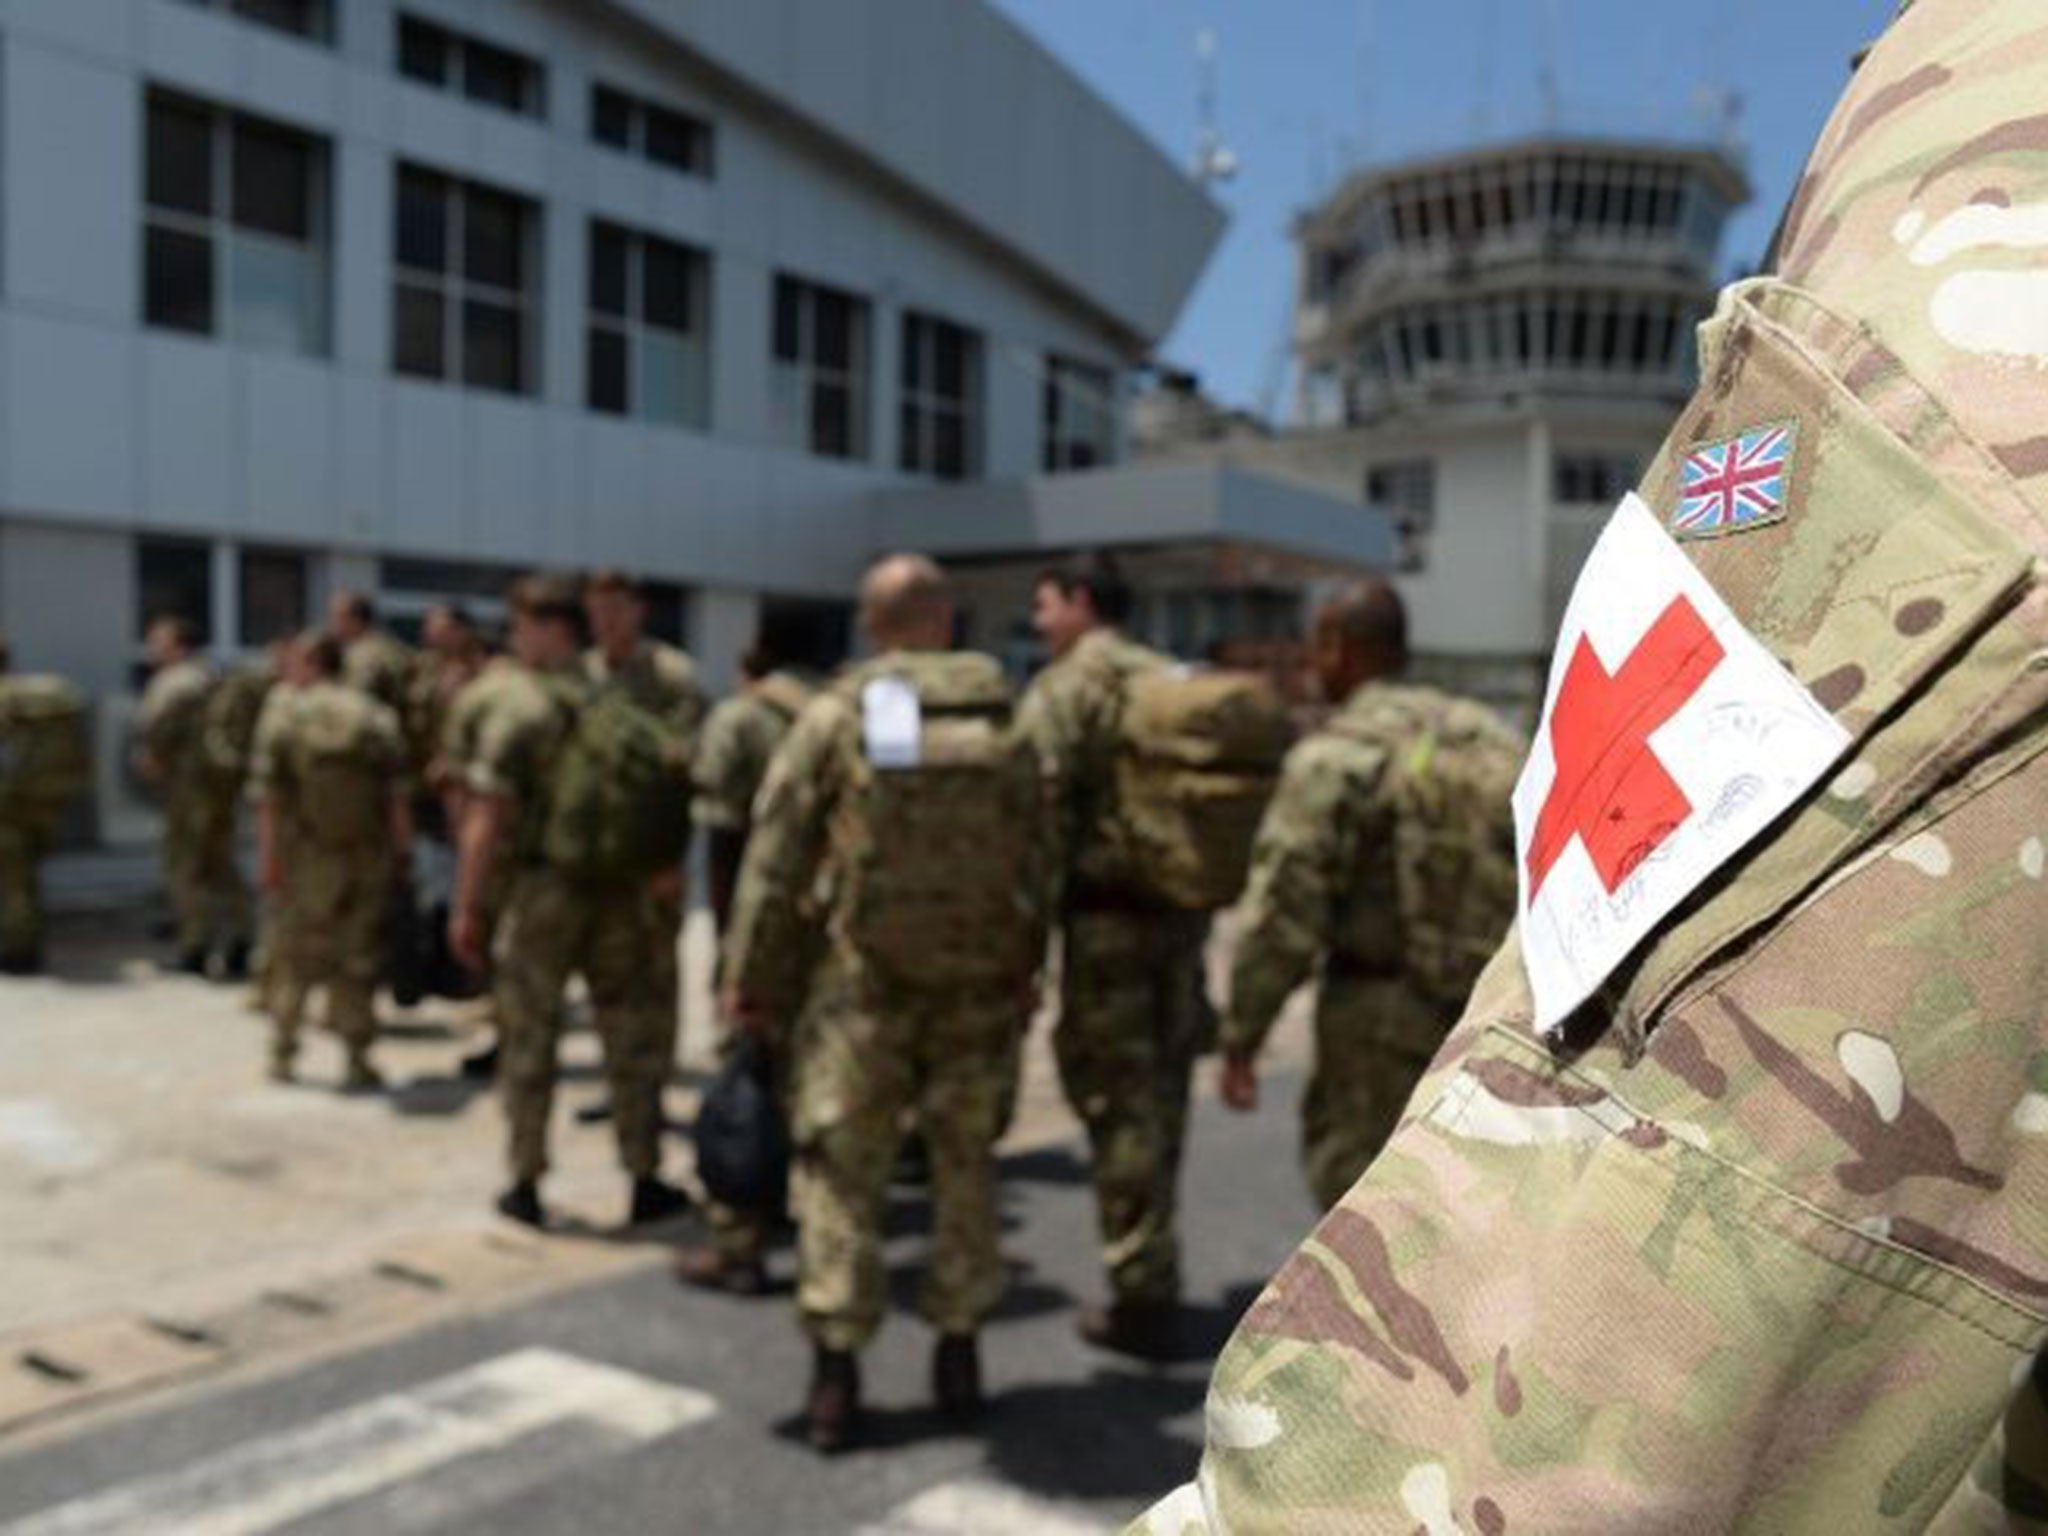 British troops arriving in Sierra Leone last year to help with the Ebola crisis